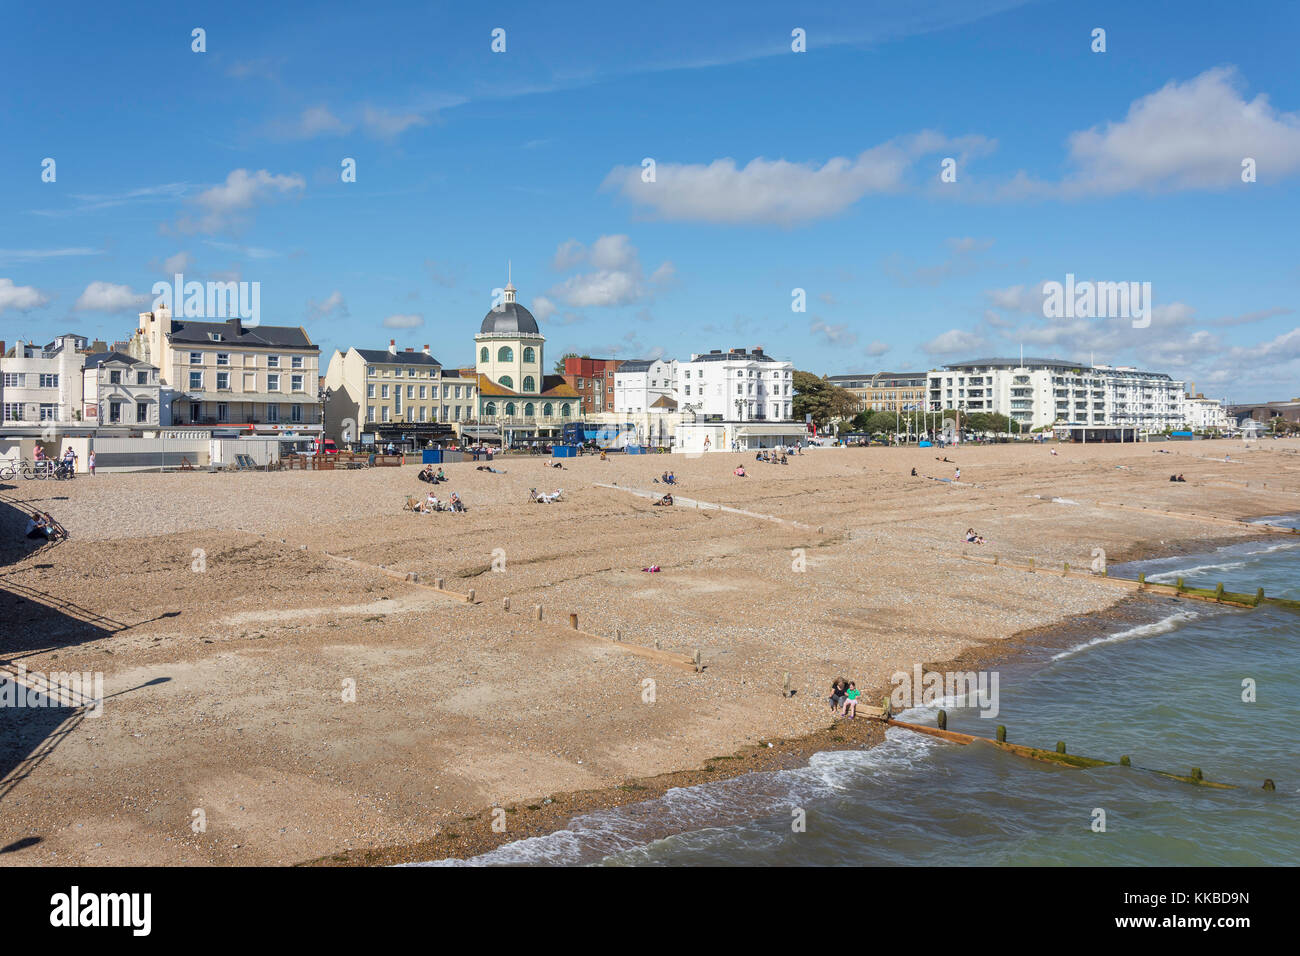 Beach and promenade from Worthing Pier, Worthing, West Sussex, England, United Kingdom Stock Photo